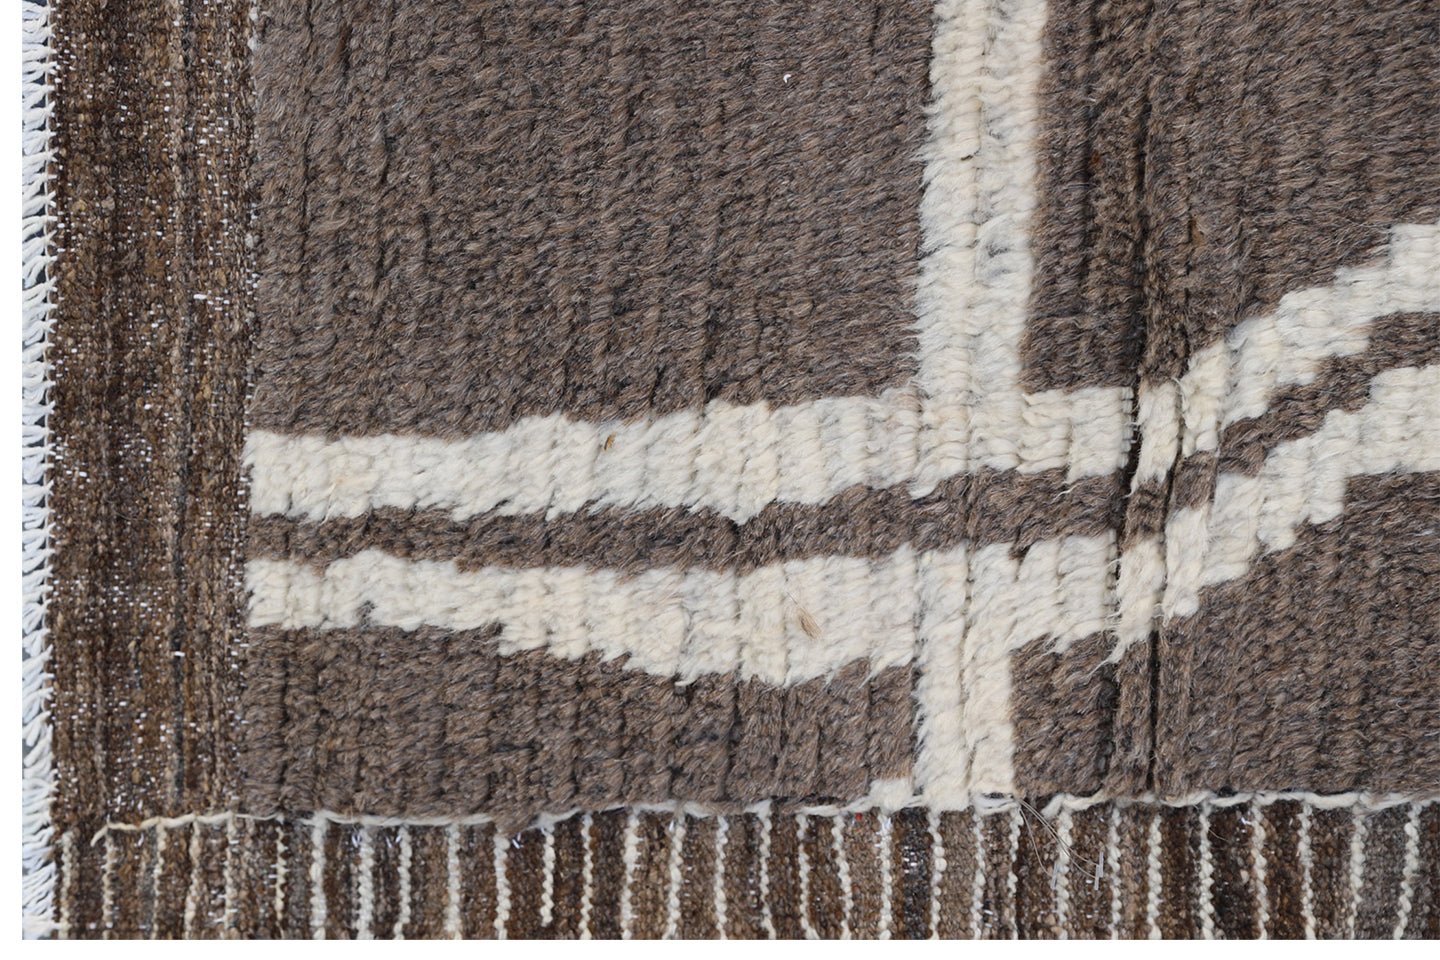 12'x16' Large Brown and White Geometric Ariana Barchi Area Rug